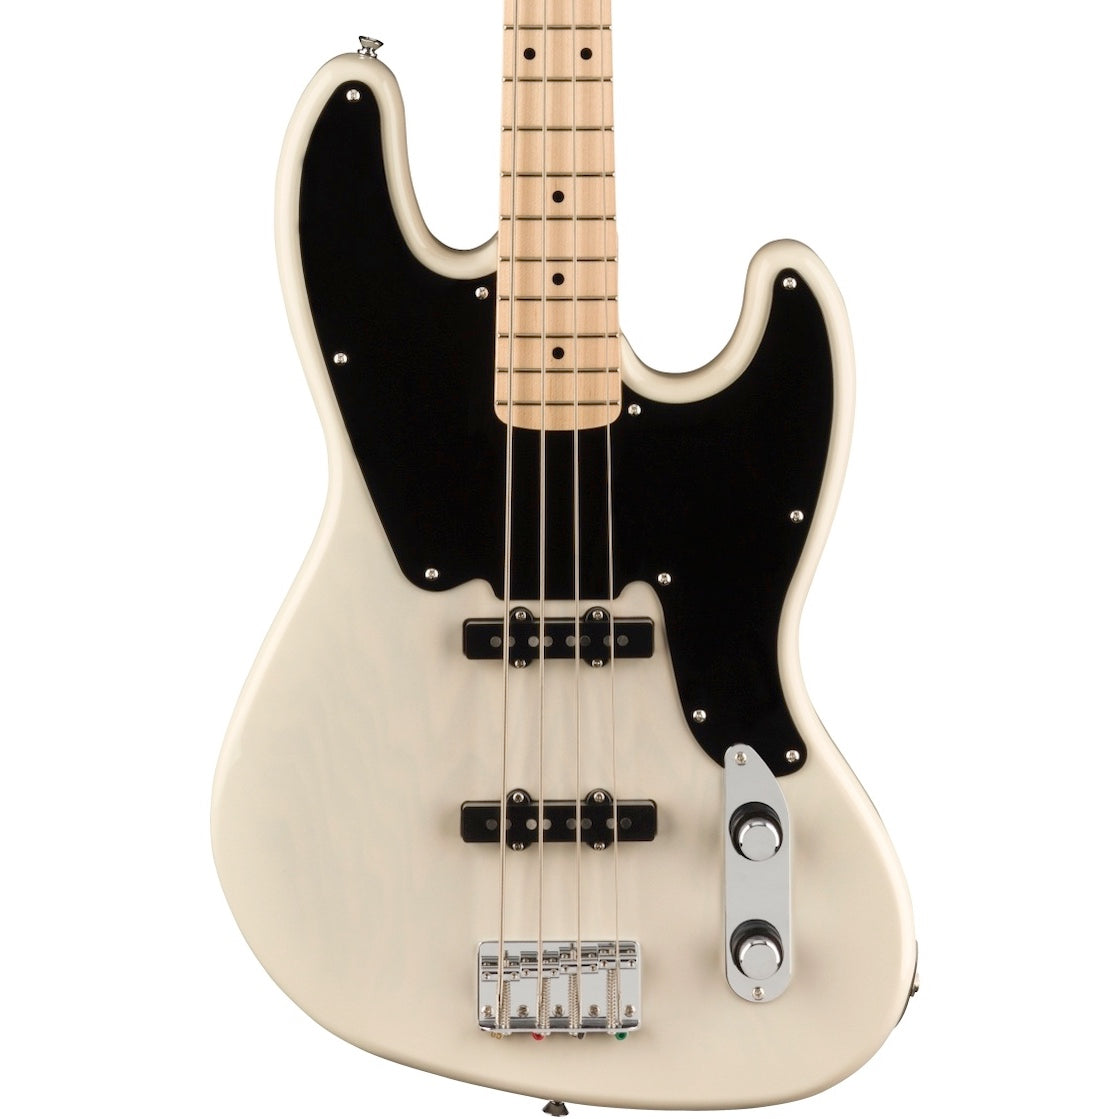 Fender Squier Paranormal Jazz Bass '54 White Blonde | Music Experience | Shop Online | South Africa